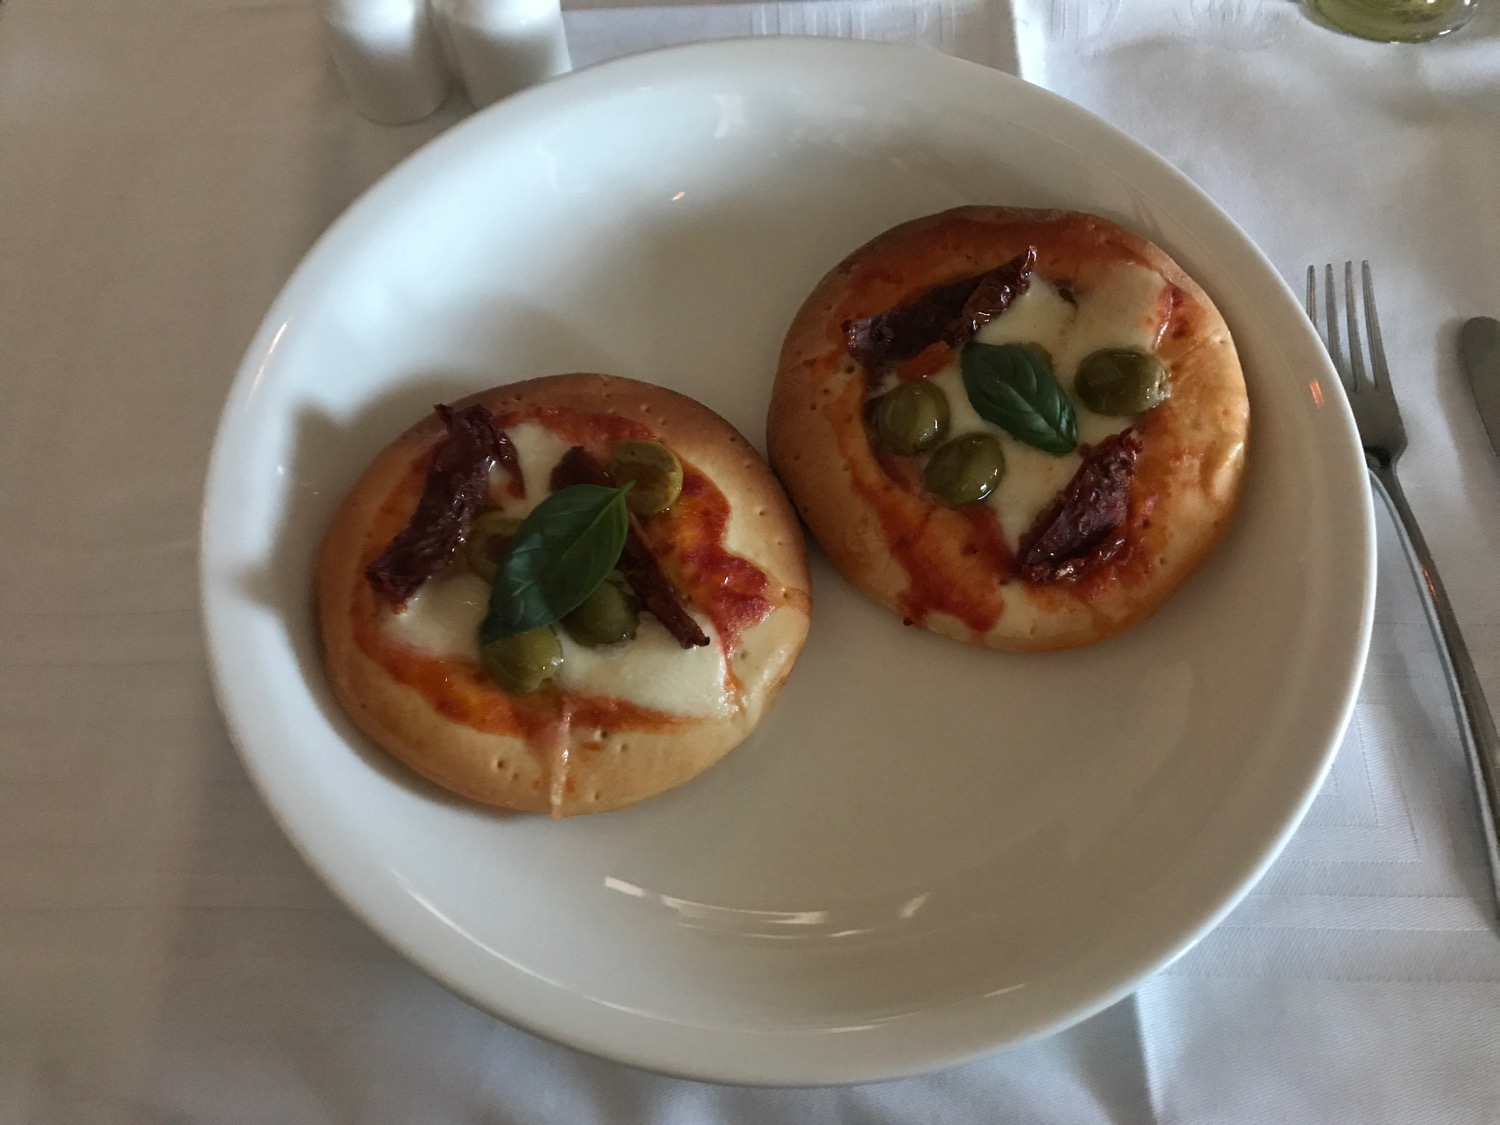 two small pizzas on a plate